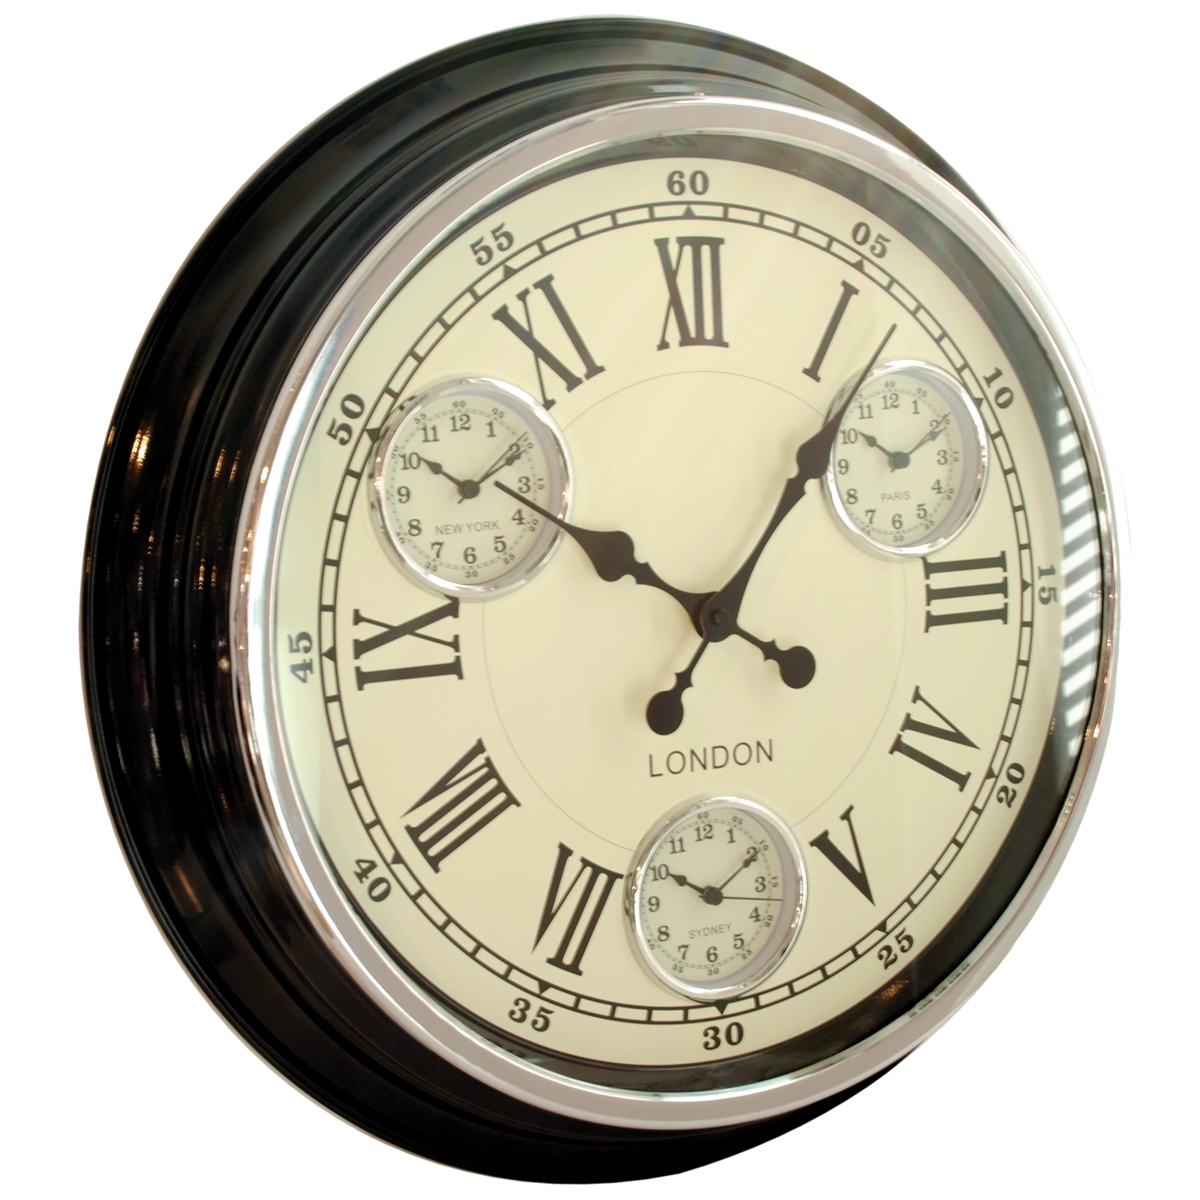 Modern vintage time zone wall clock cream dial